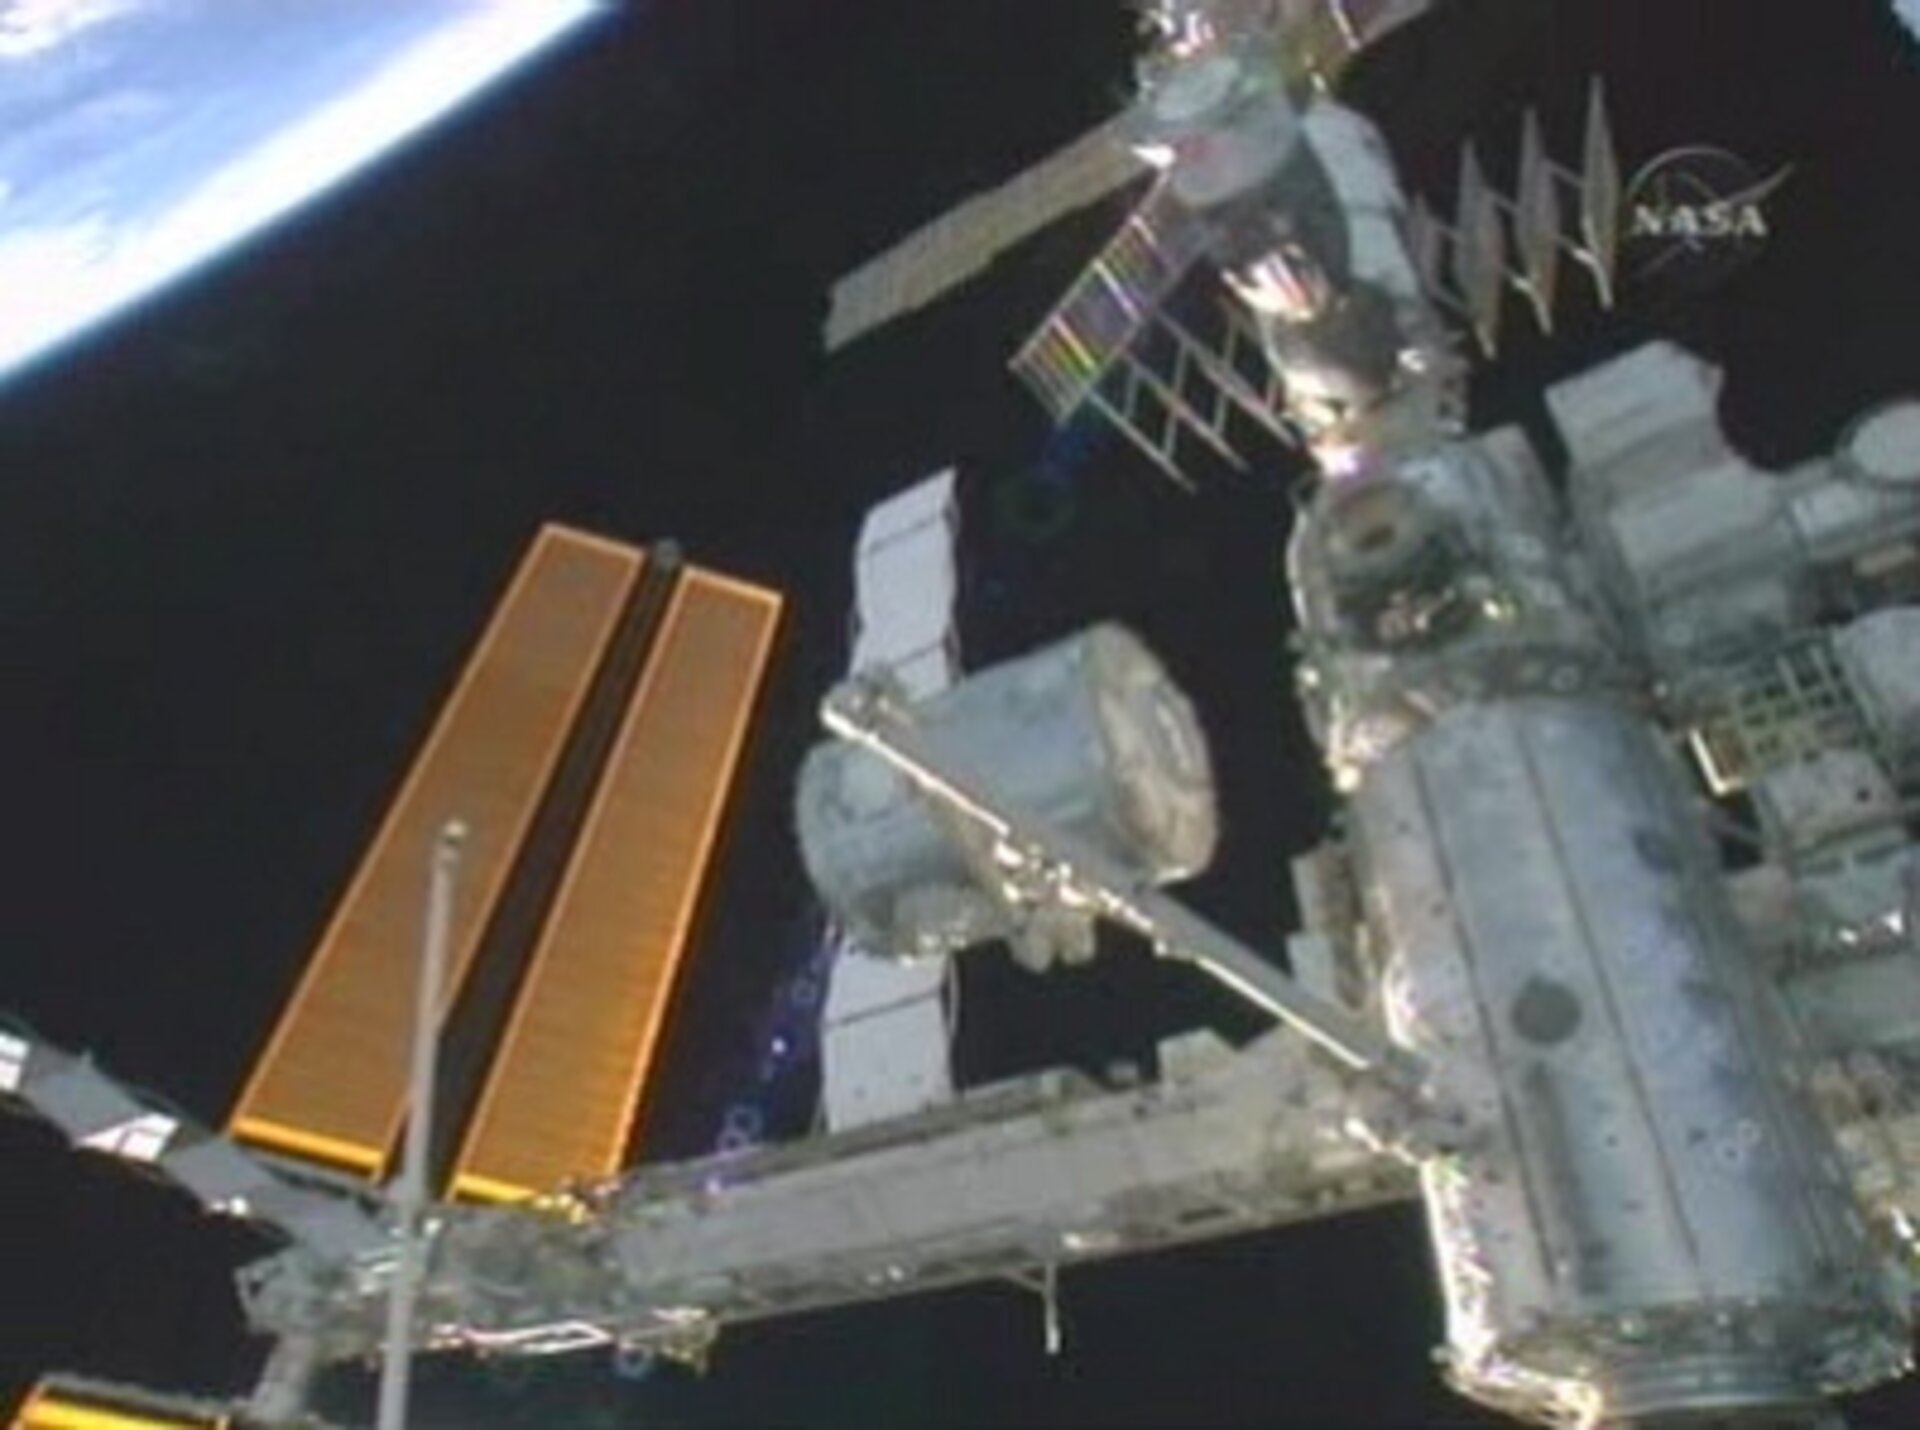 Harmony is moved to its temporary location on Node 1 (lower right corner)